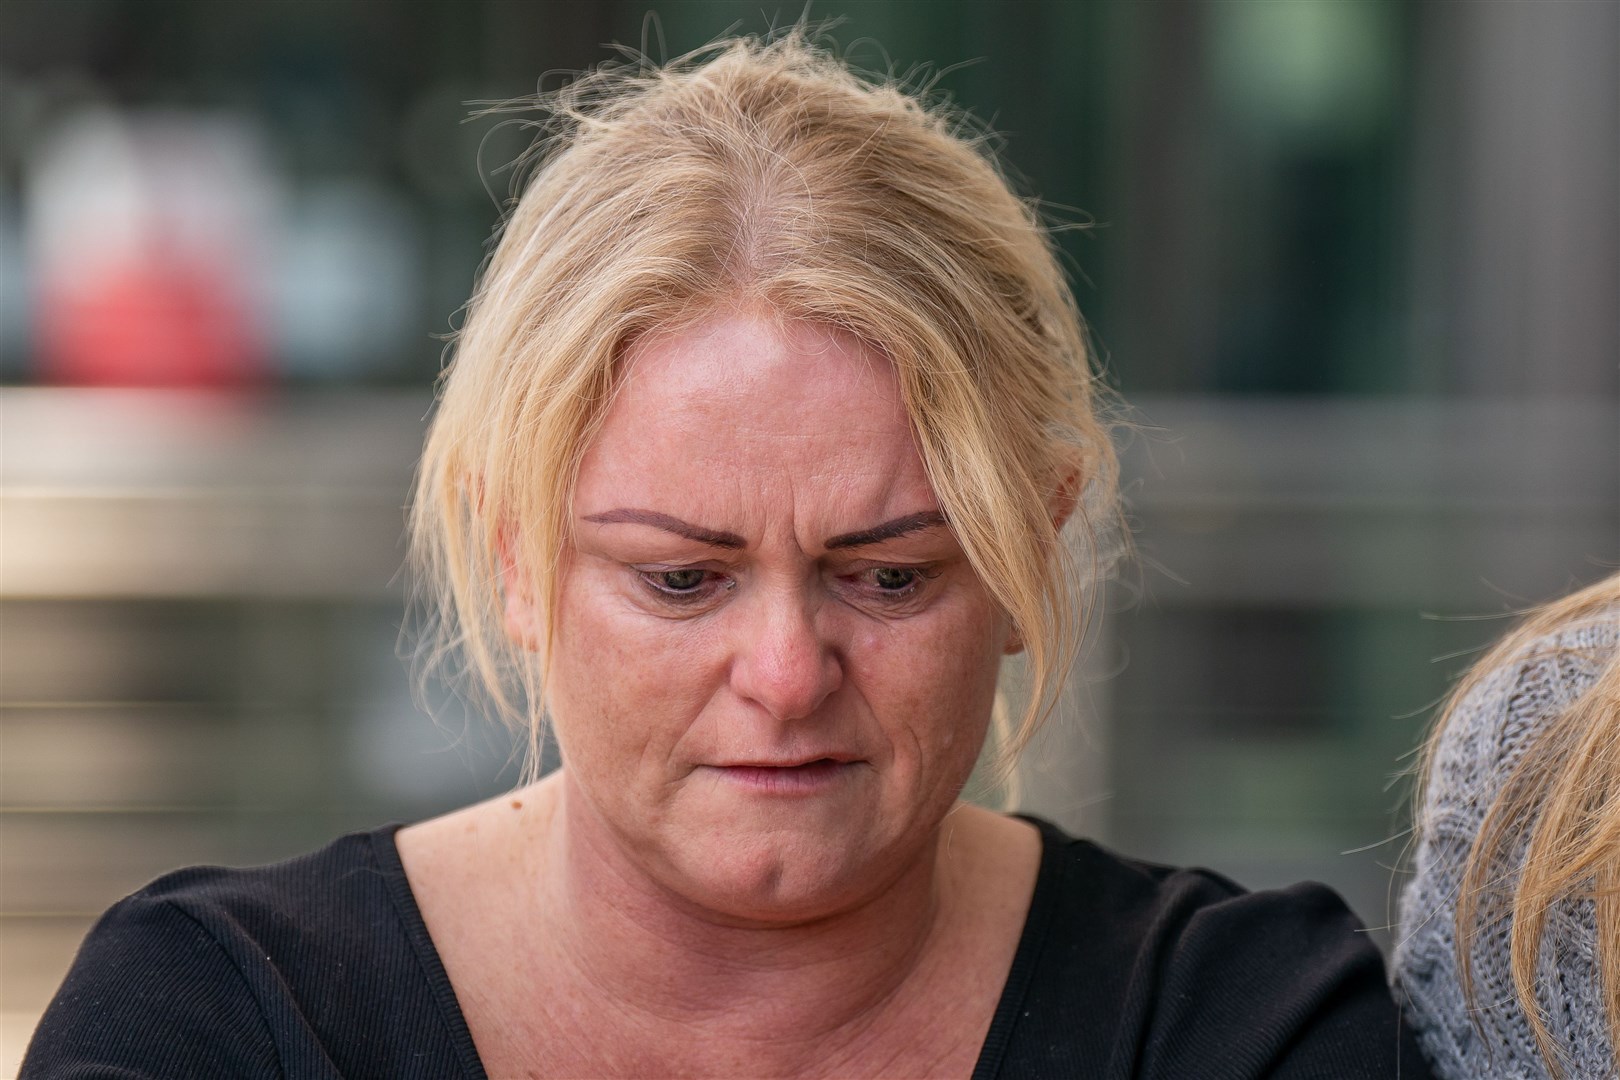 Archie Battersbee’s mother, Hollie Dance, said she felt ‘backed into a corner’ by the legal system (Aaron Chown/PA)